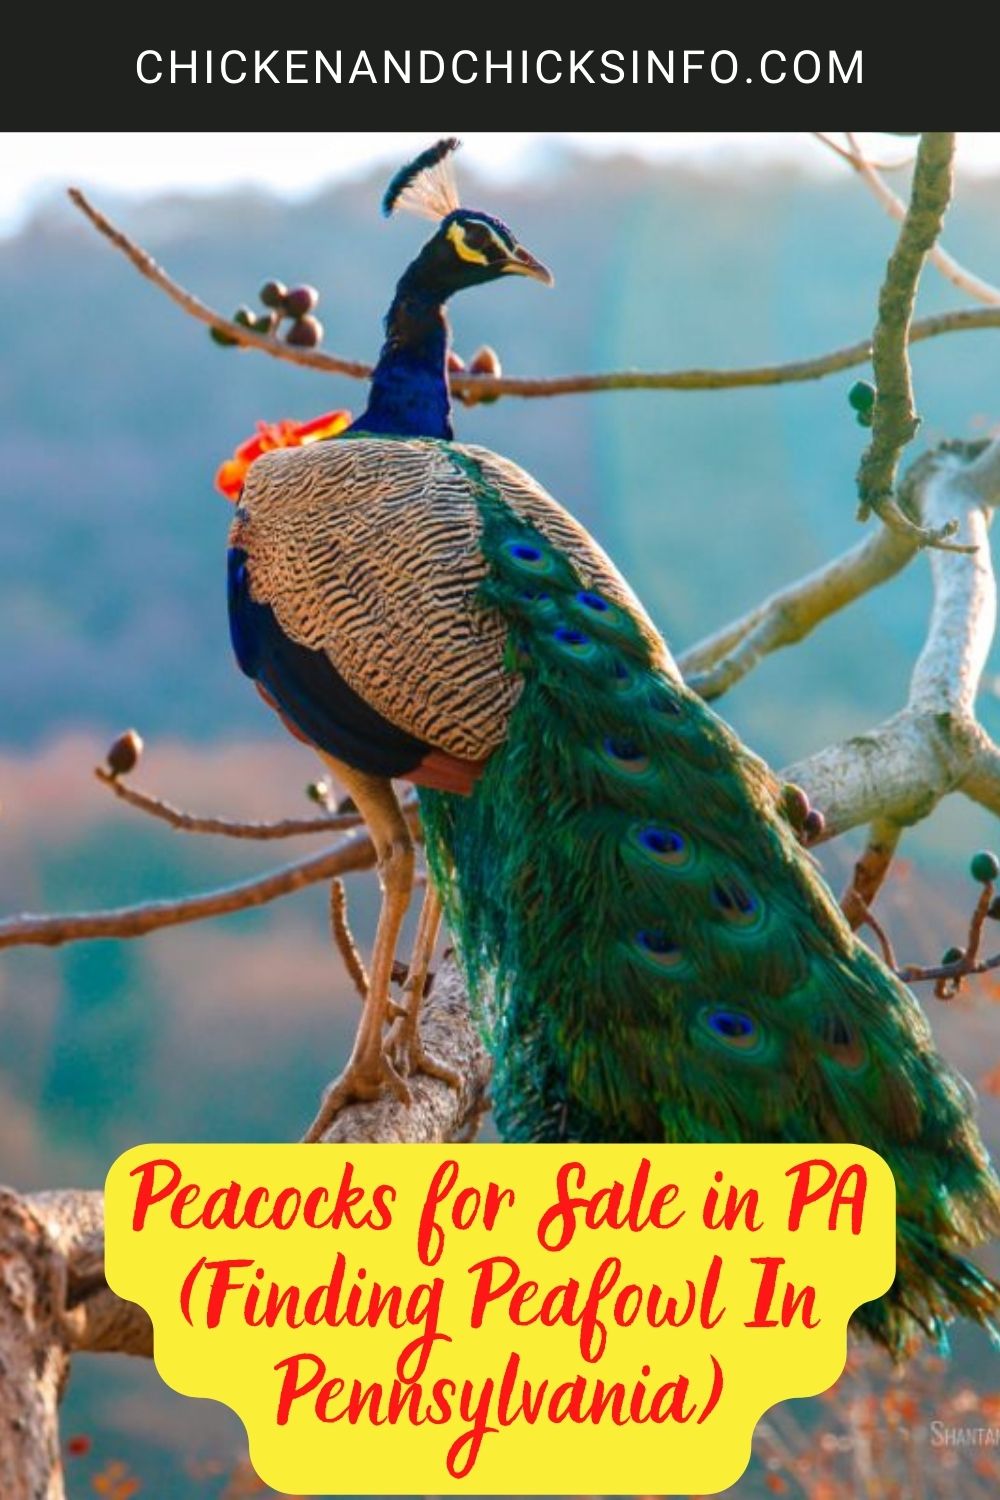 Peacocks for Sale in PA poster.
